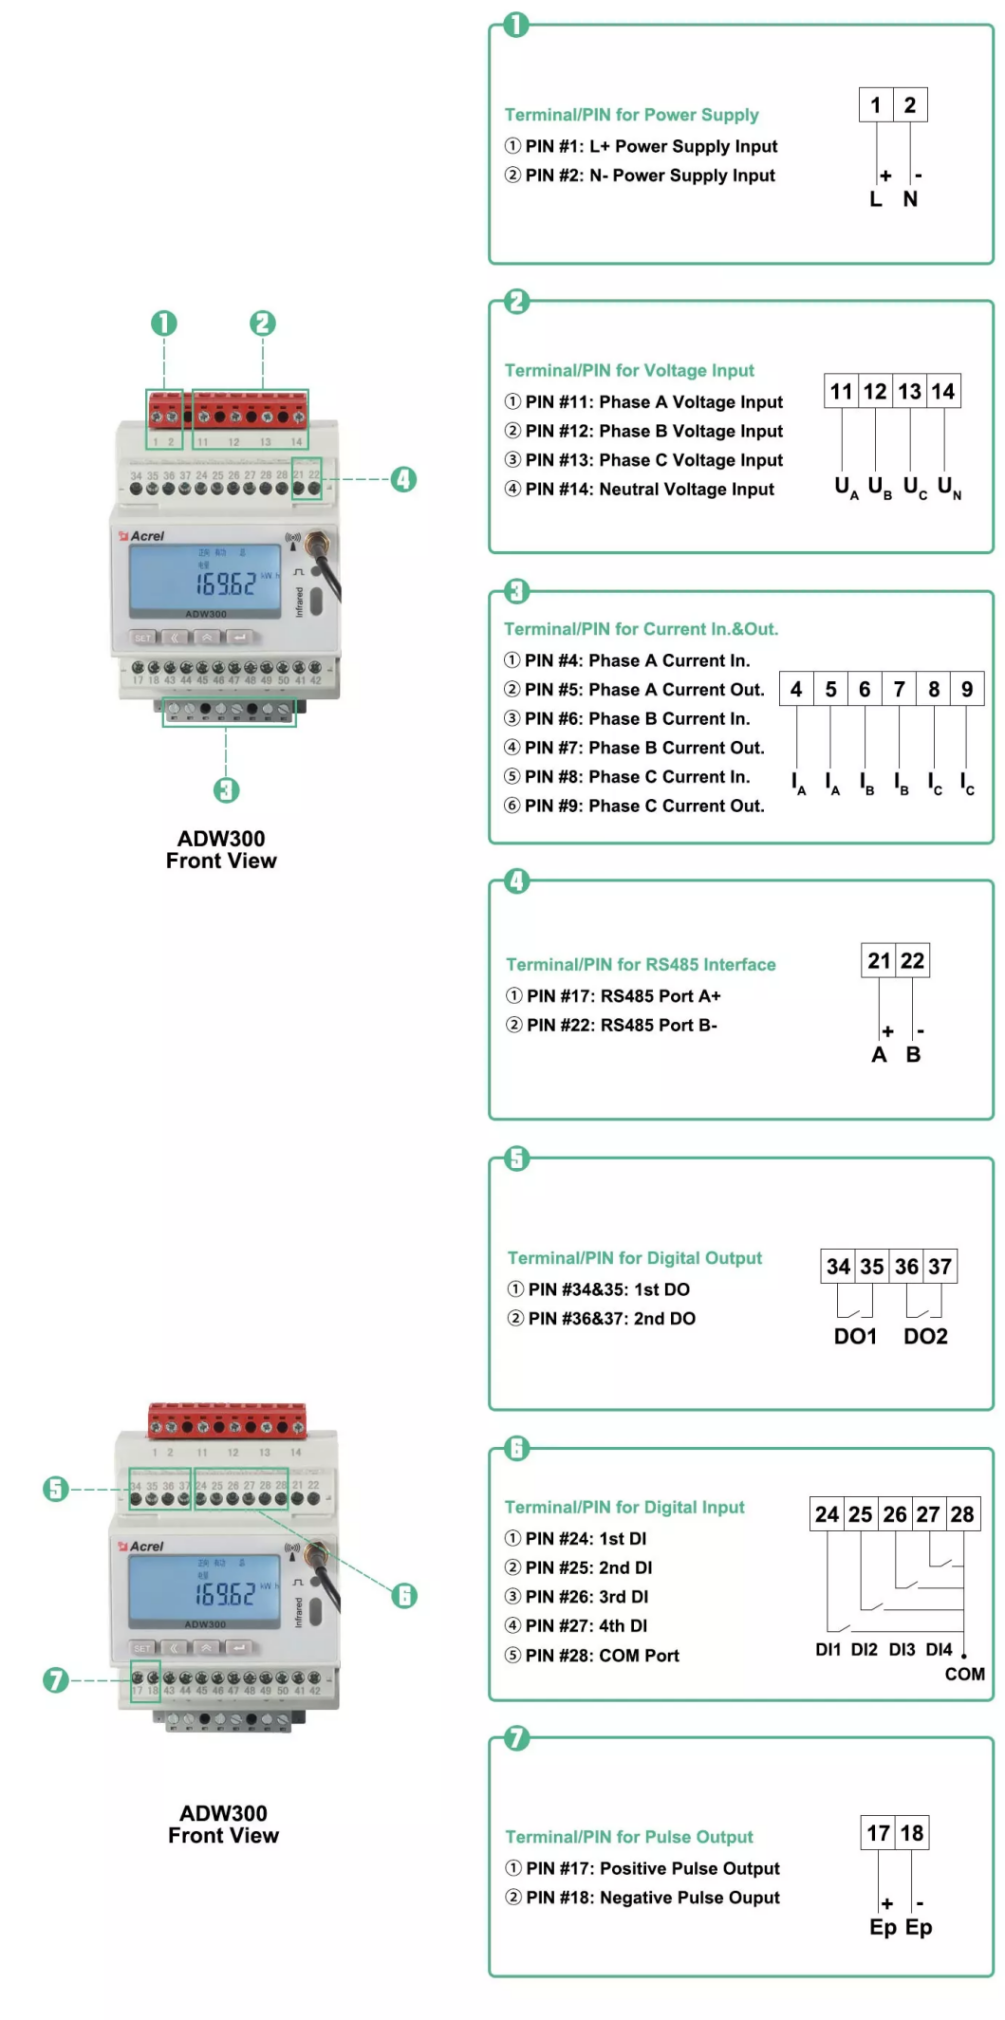 Acrel ADW300 3-Phase 4G Wireless Power Consumption Meter Pin Overview